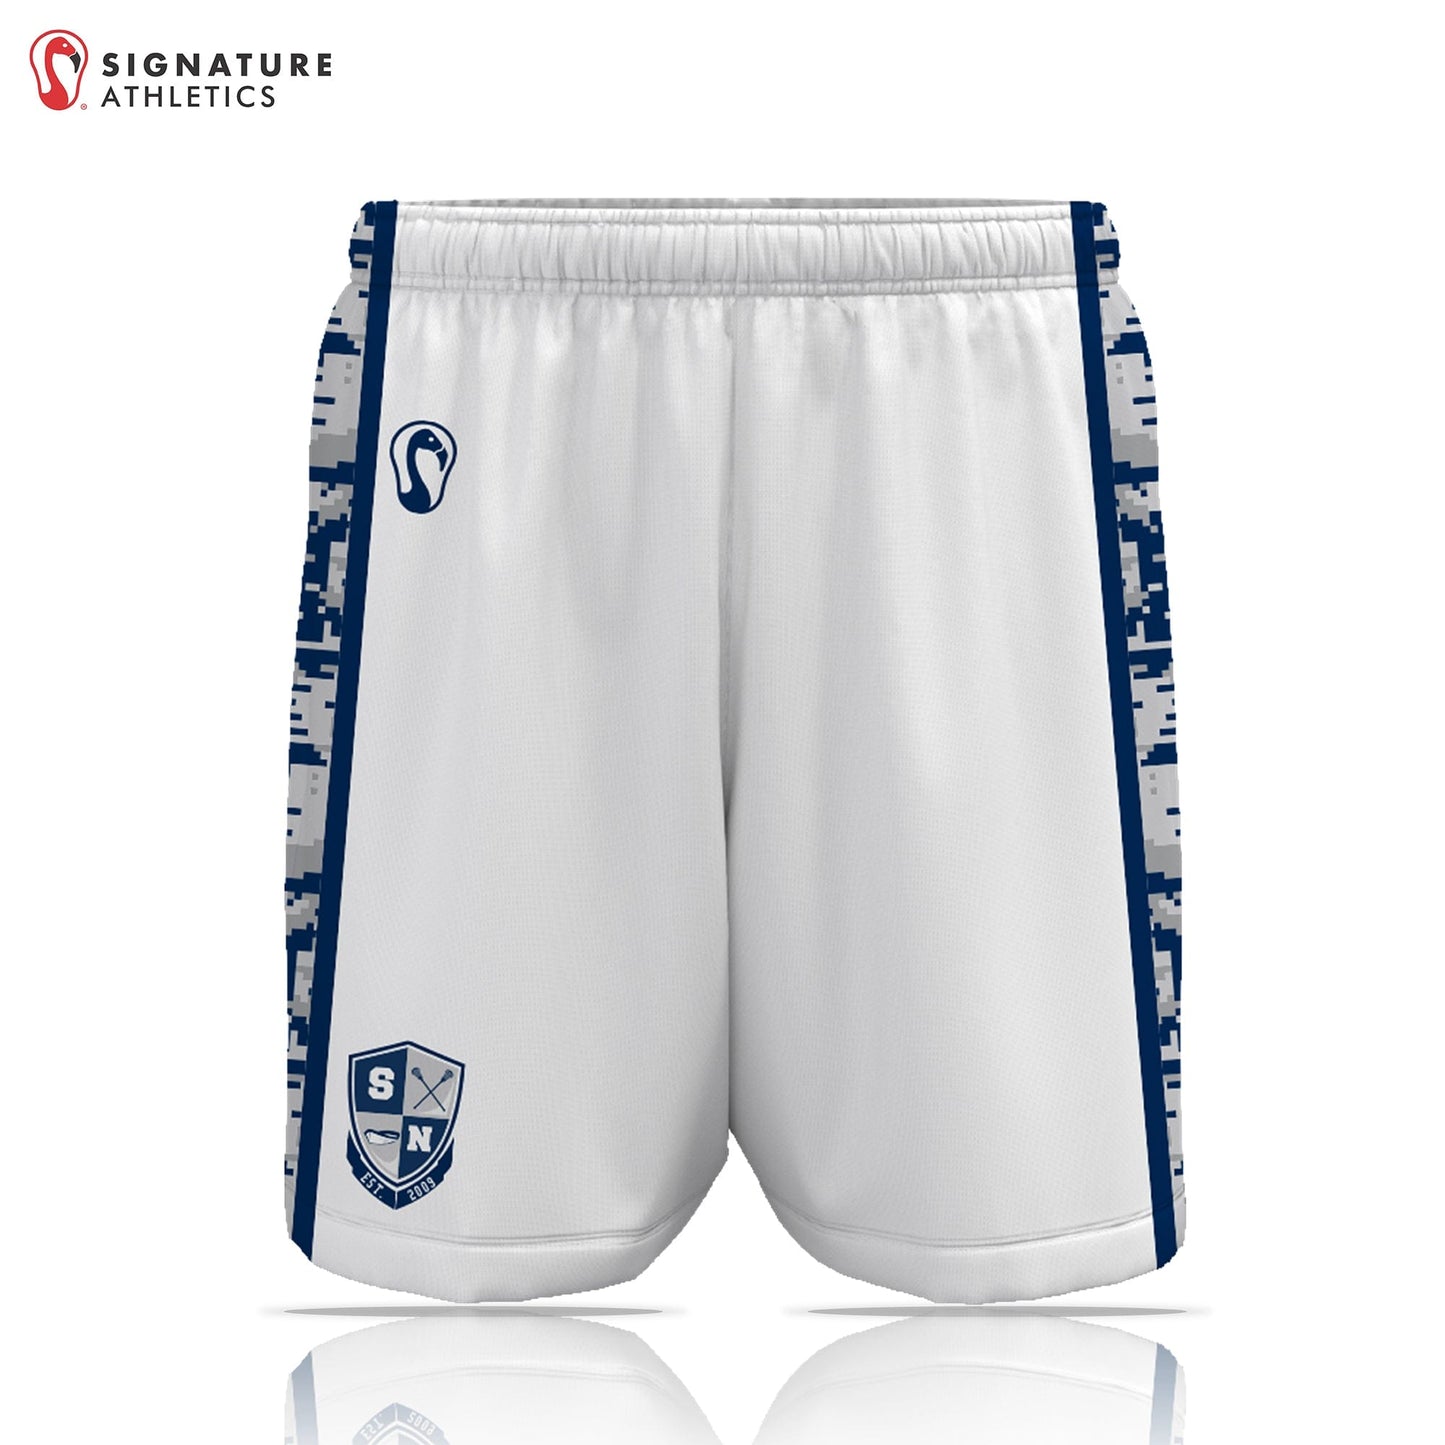 SNYL Team Swag Store Men's Performance Game Shorts (Sold Seperately):Boys U15 Signature Lacrosse